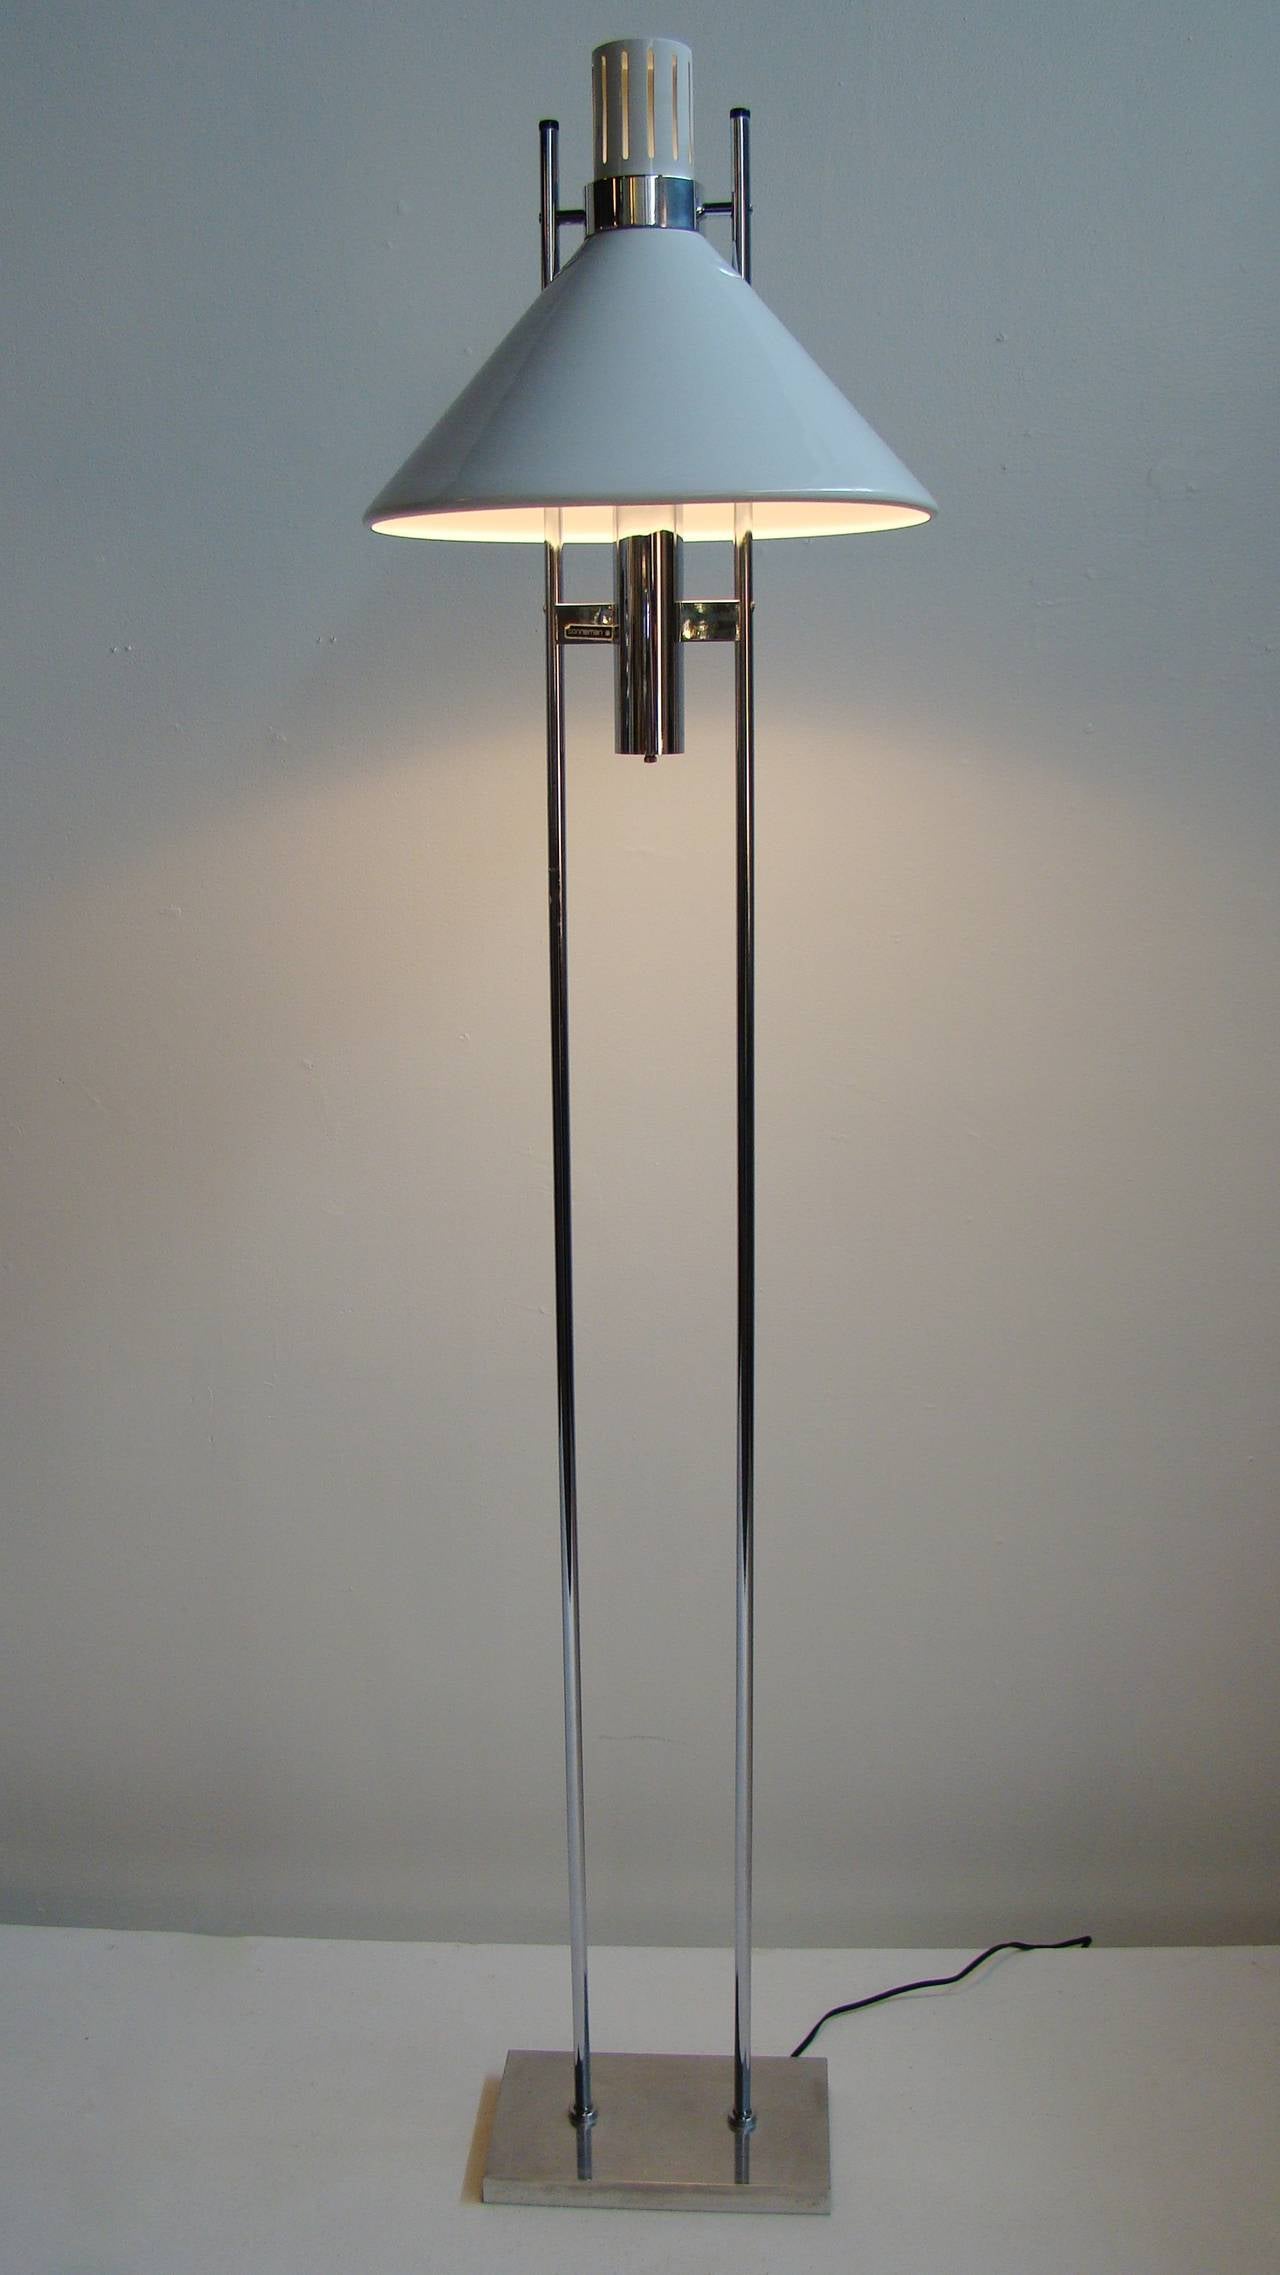 This floor lamp features a white powder coated shade supported by two chrome bars and sits on a chrome base. It retains the original Sonneman paper label.